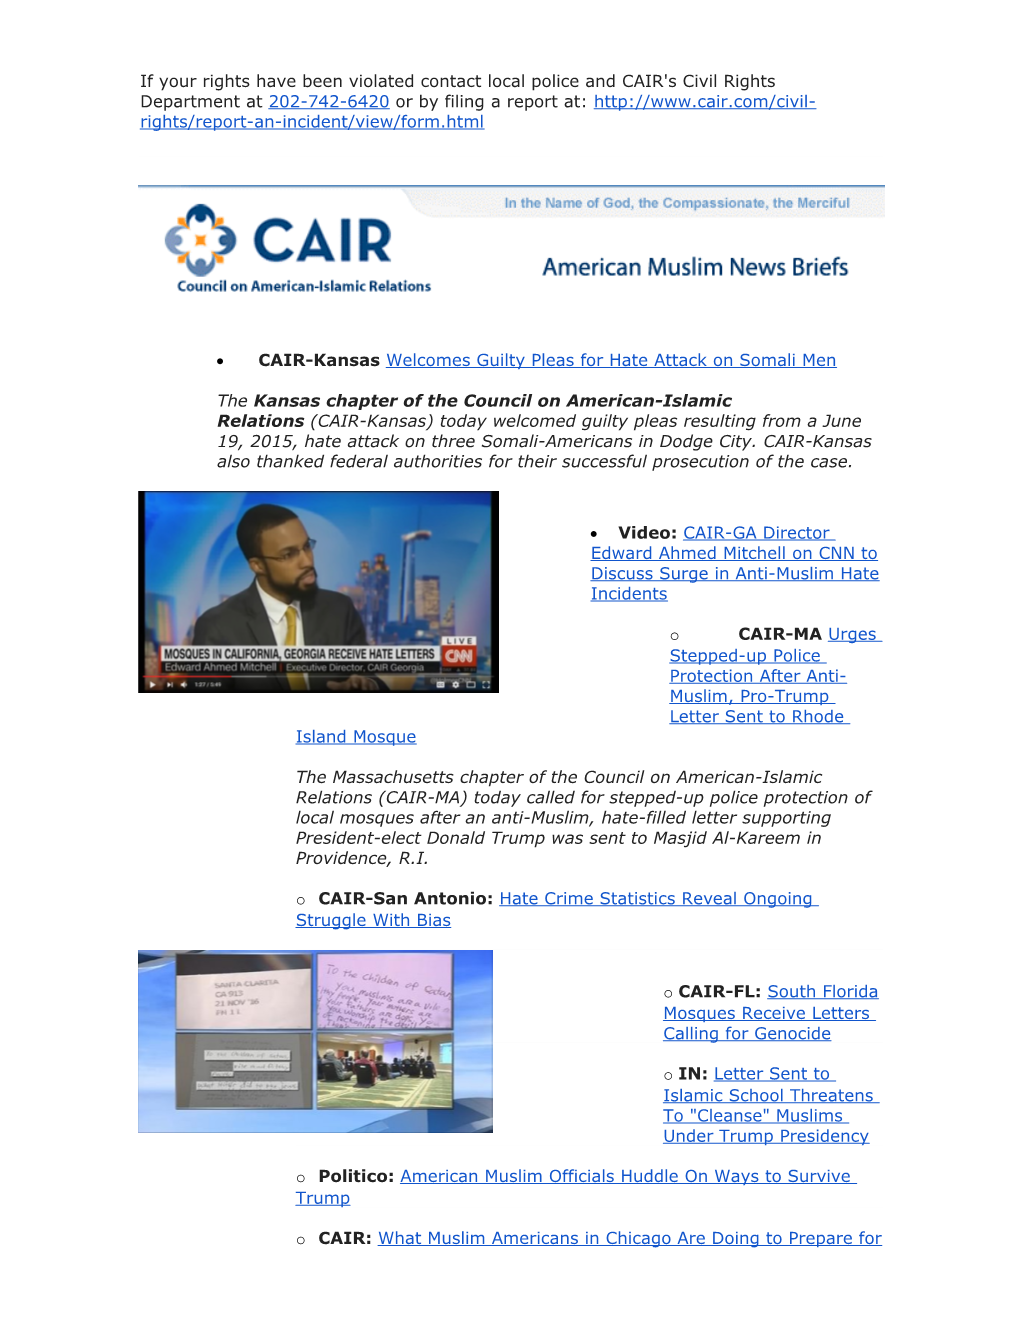 Video:CAIR-GA Director Edward Ahmed Mitchell on CNN to Discuss Surge in Anti-Muslim Hate